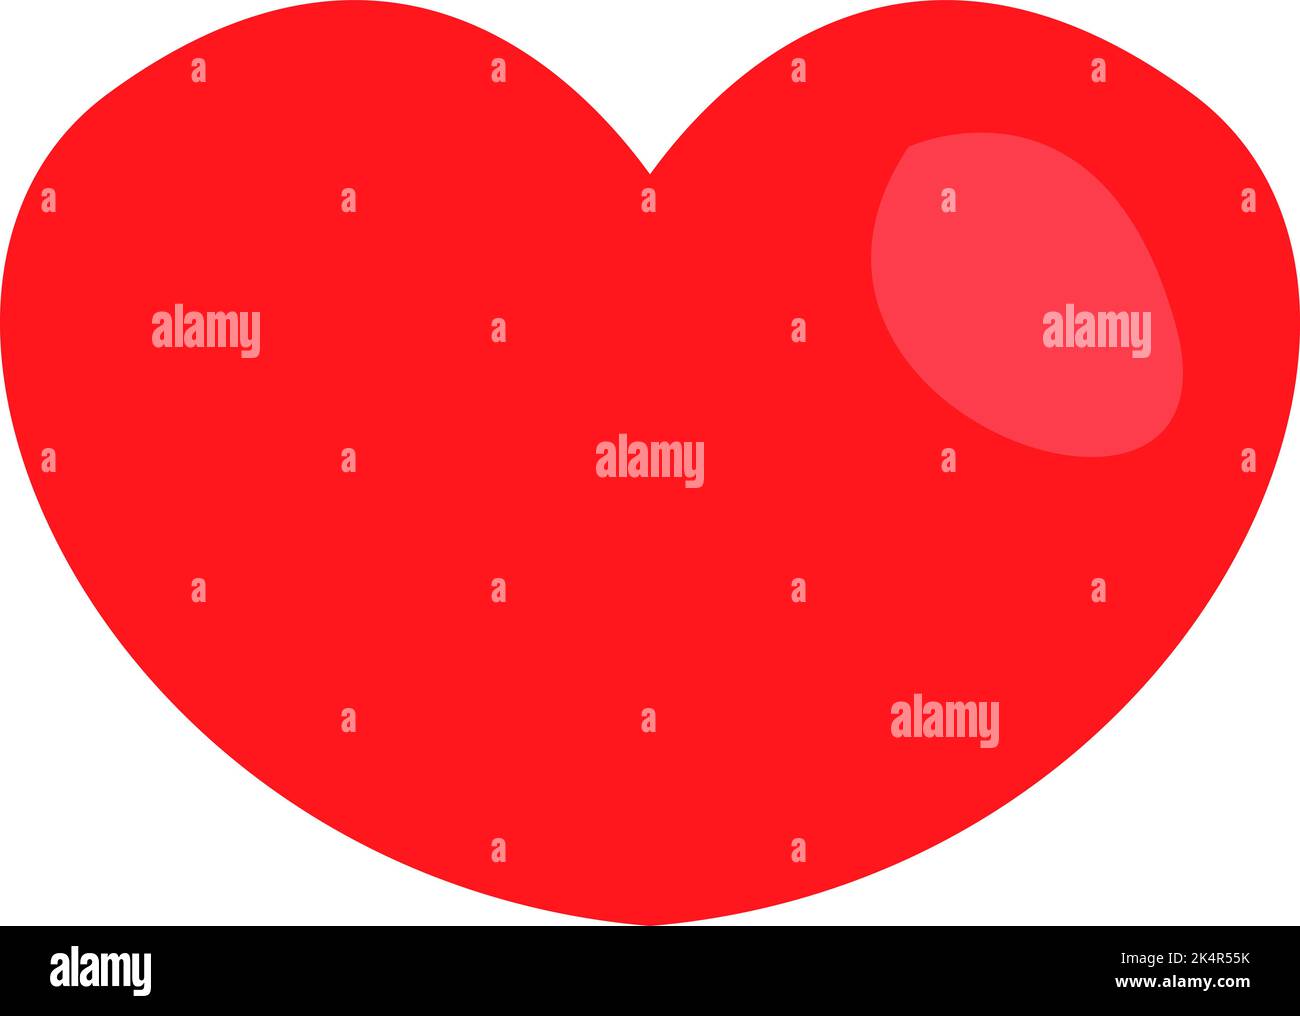 Red heart, illustration, vector on a white background. Stock Vector